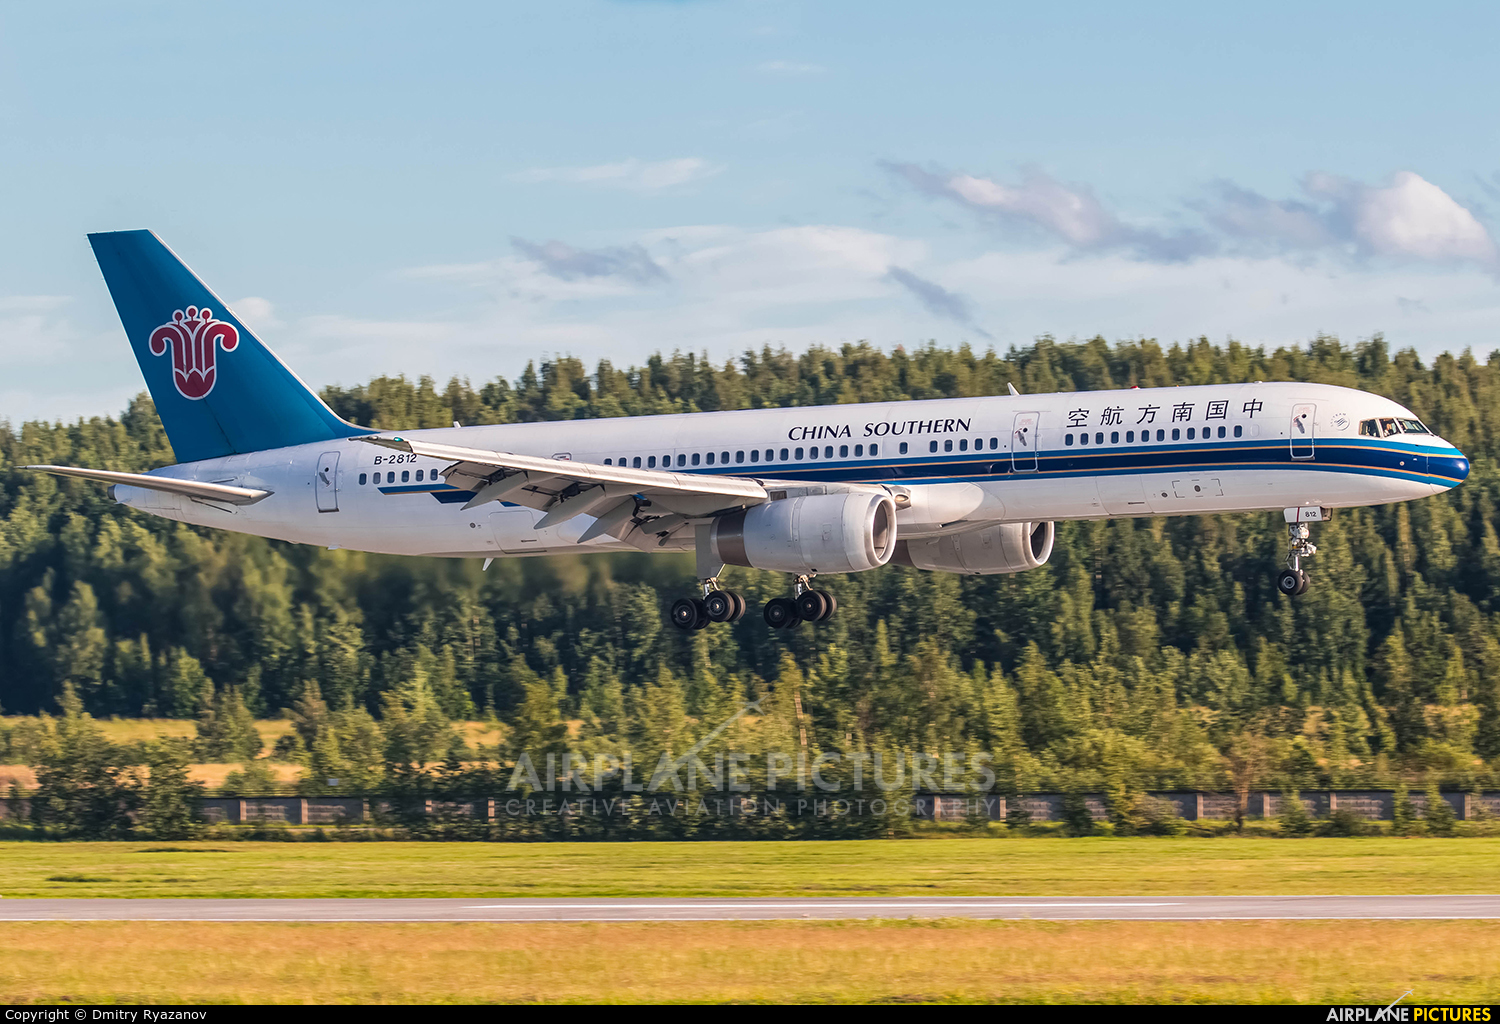 B2812 China Southern Airlines Boeing 757200 at St